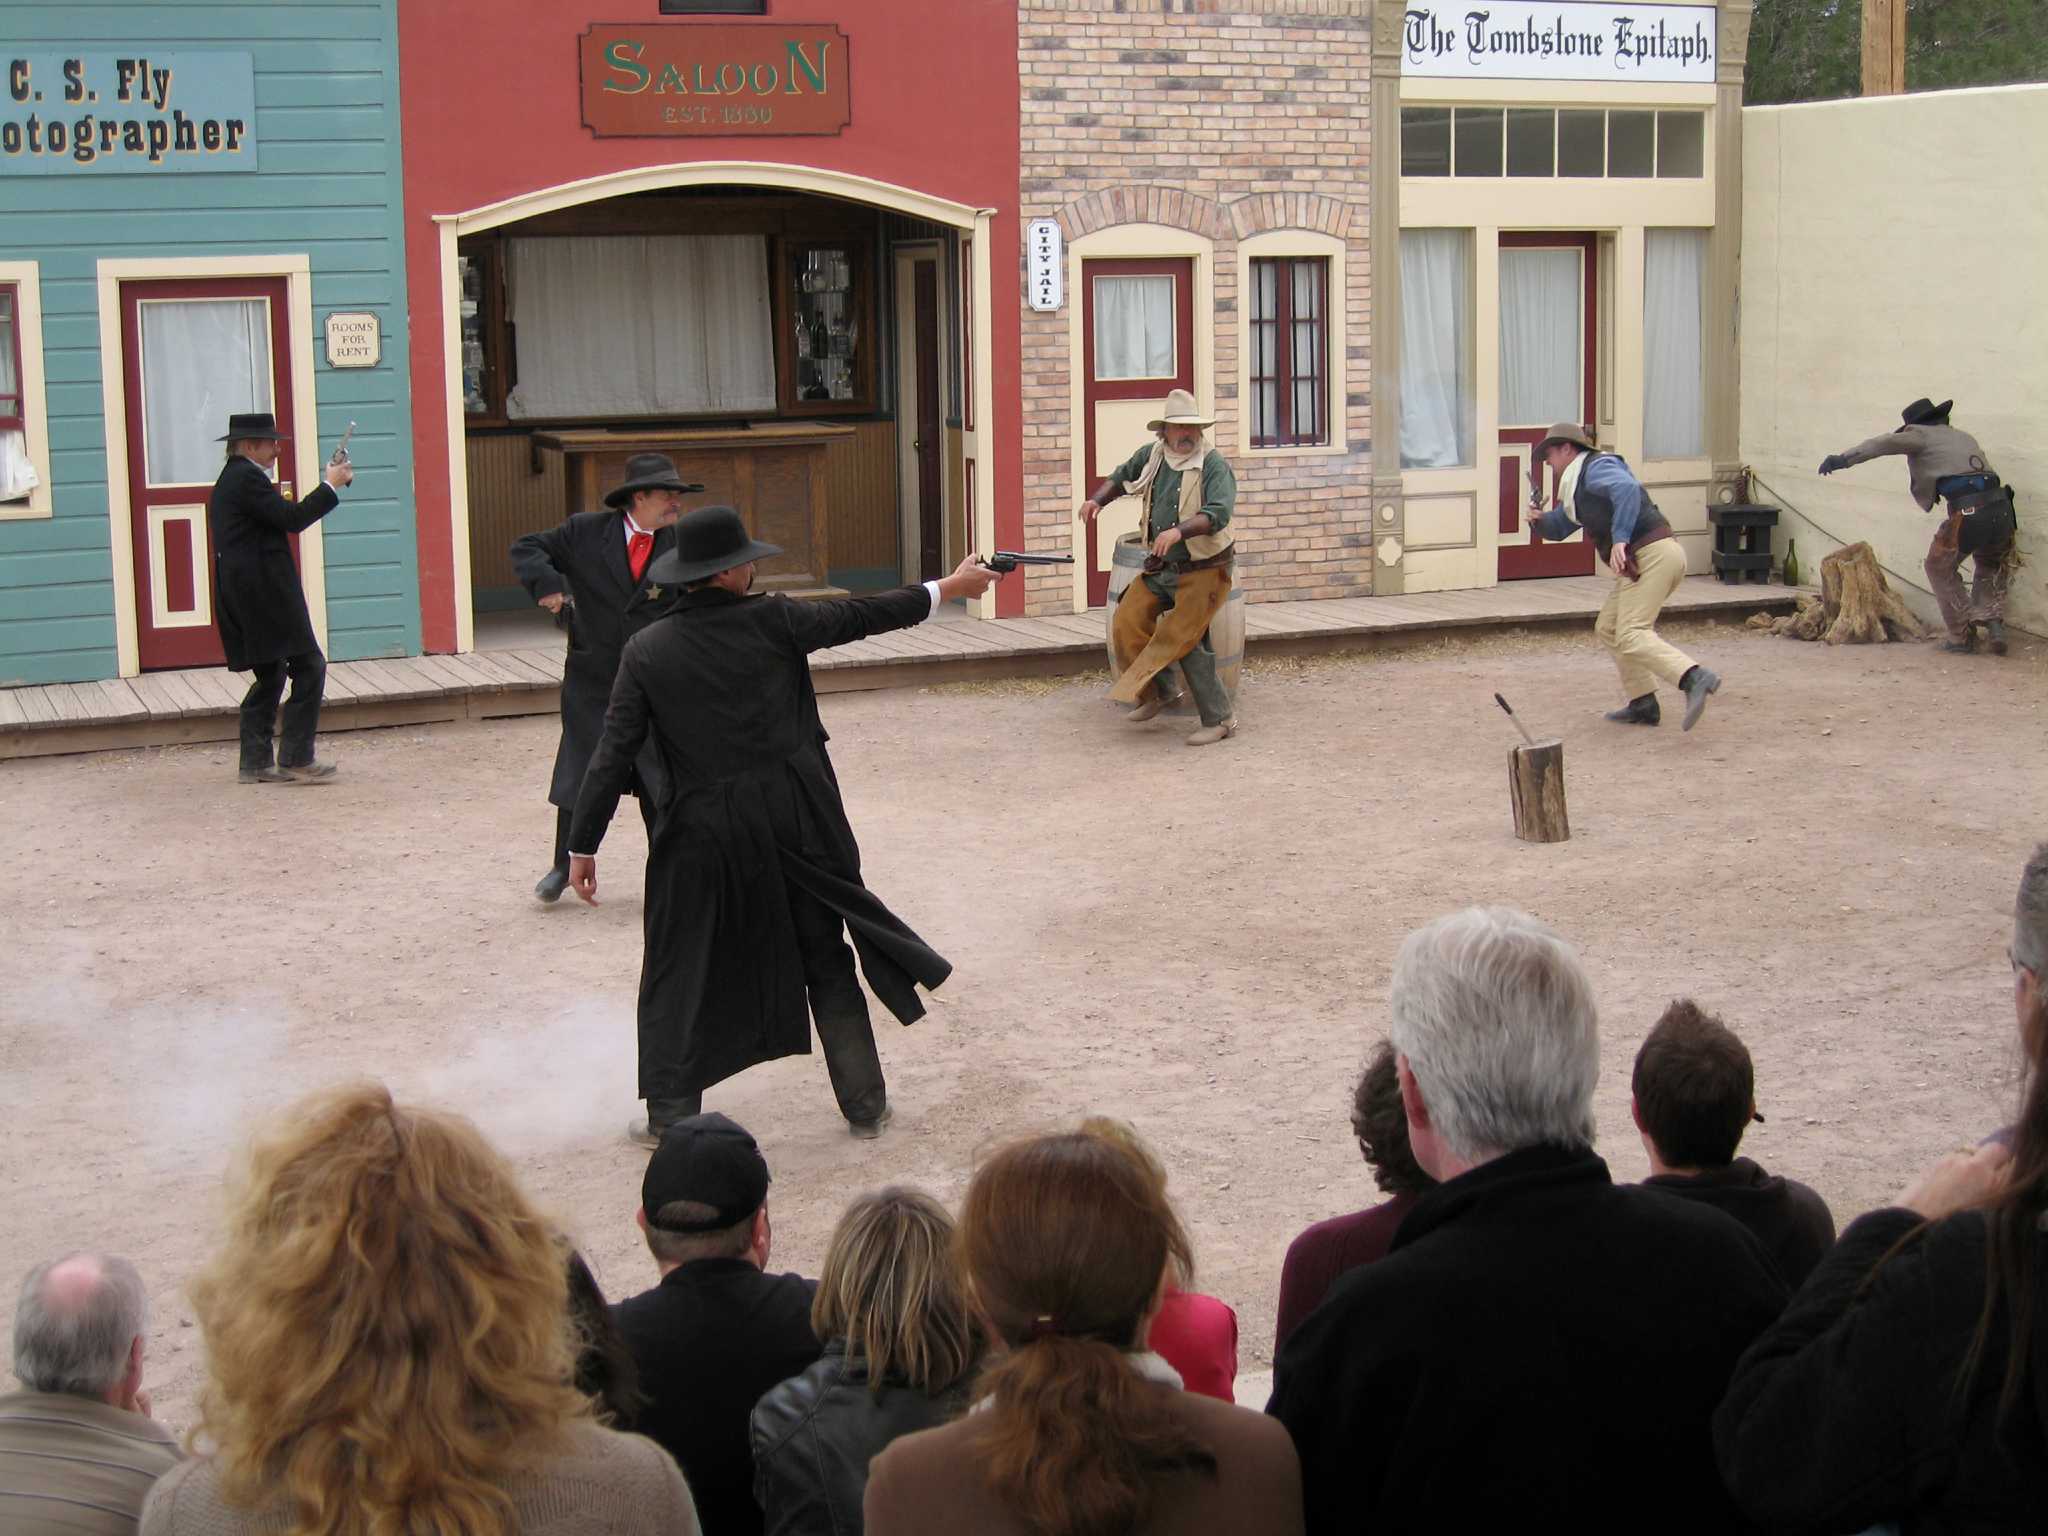 wild-west-gunfight-re-enactments-put-on-hold-after-real-bullet-hits-actor